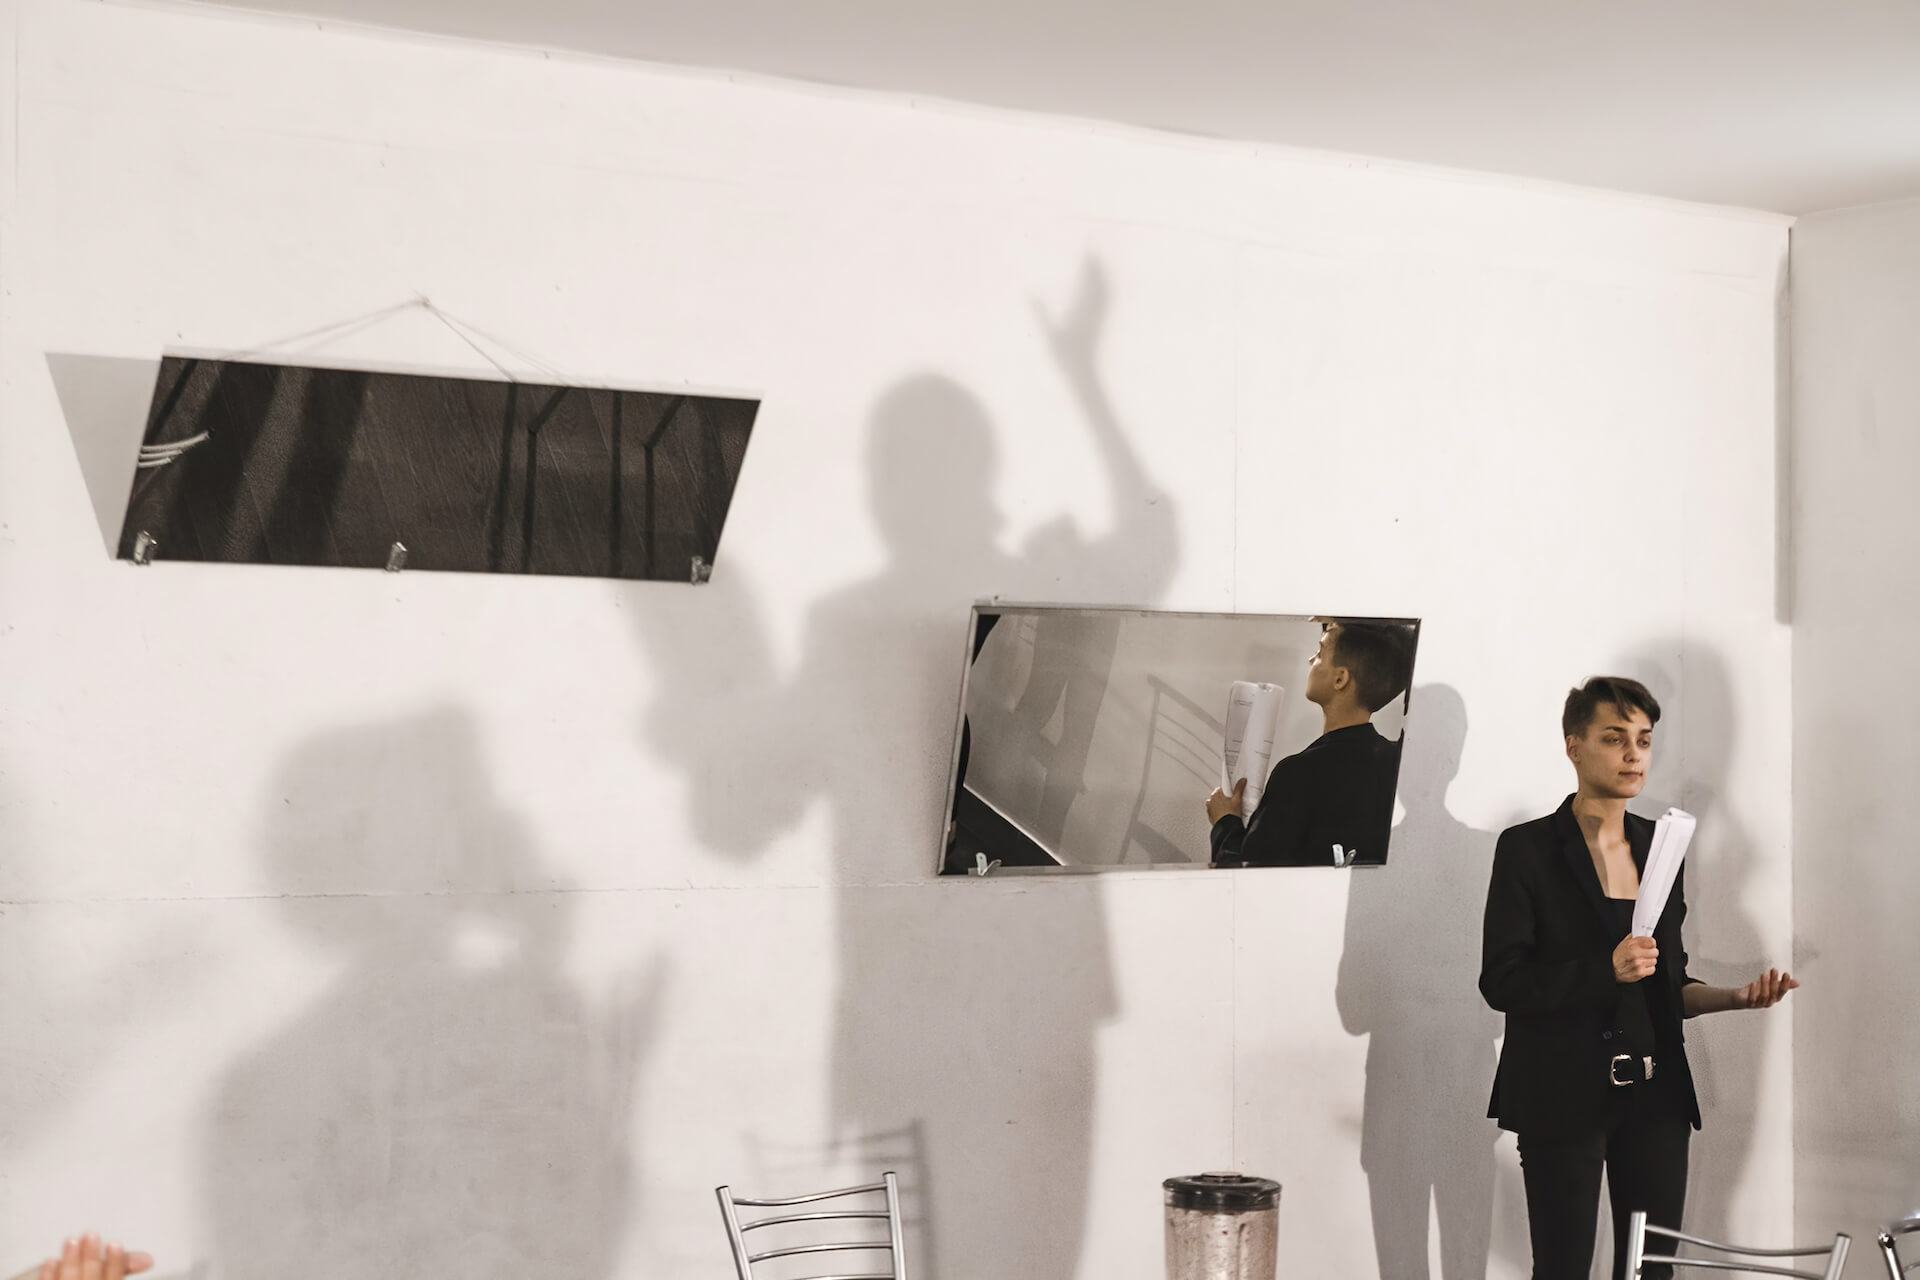 There are two mirrors hanging by the wall. On the same wall, there are shadows of performers performing with scripts on their hands. One performer stands in front of the mirror on the right, facing towards the audience.